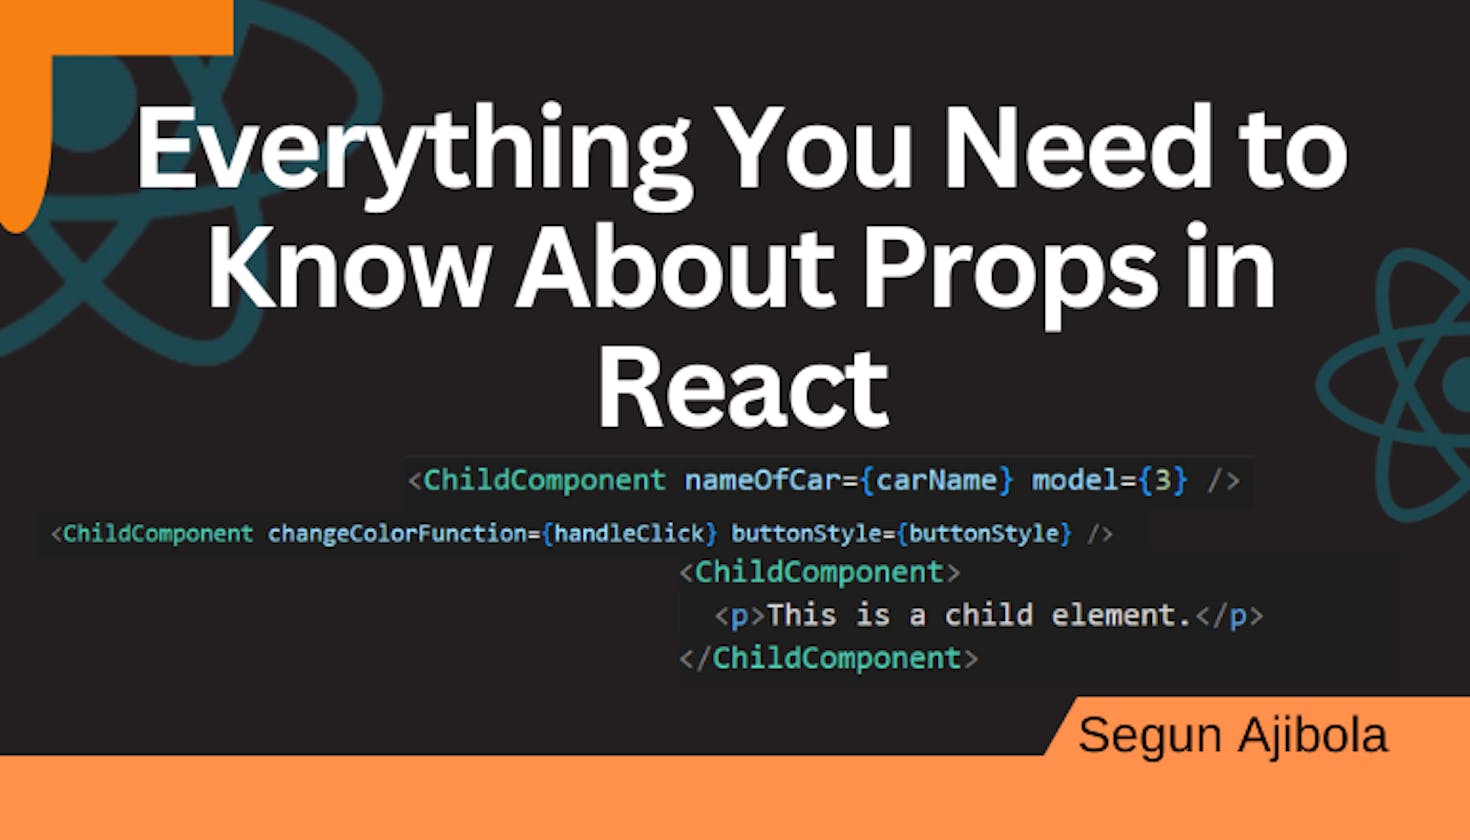 Everything You Need to Know About Props in React